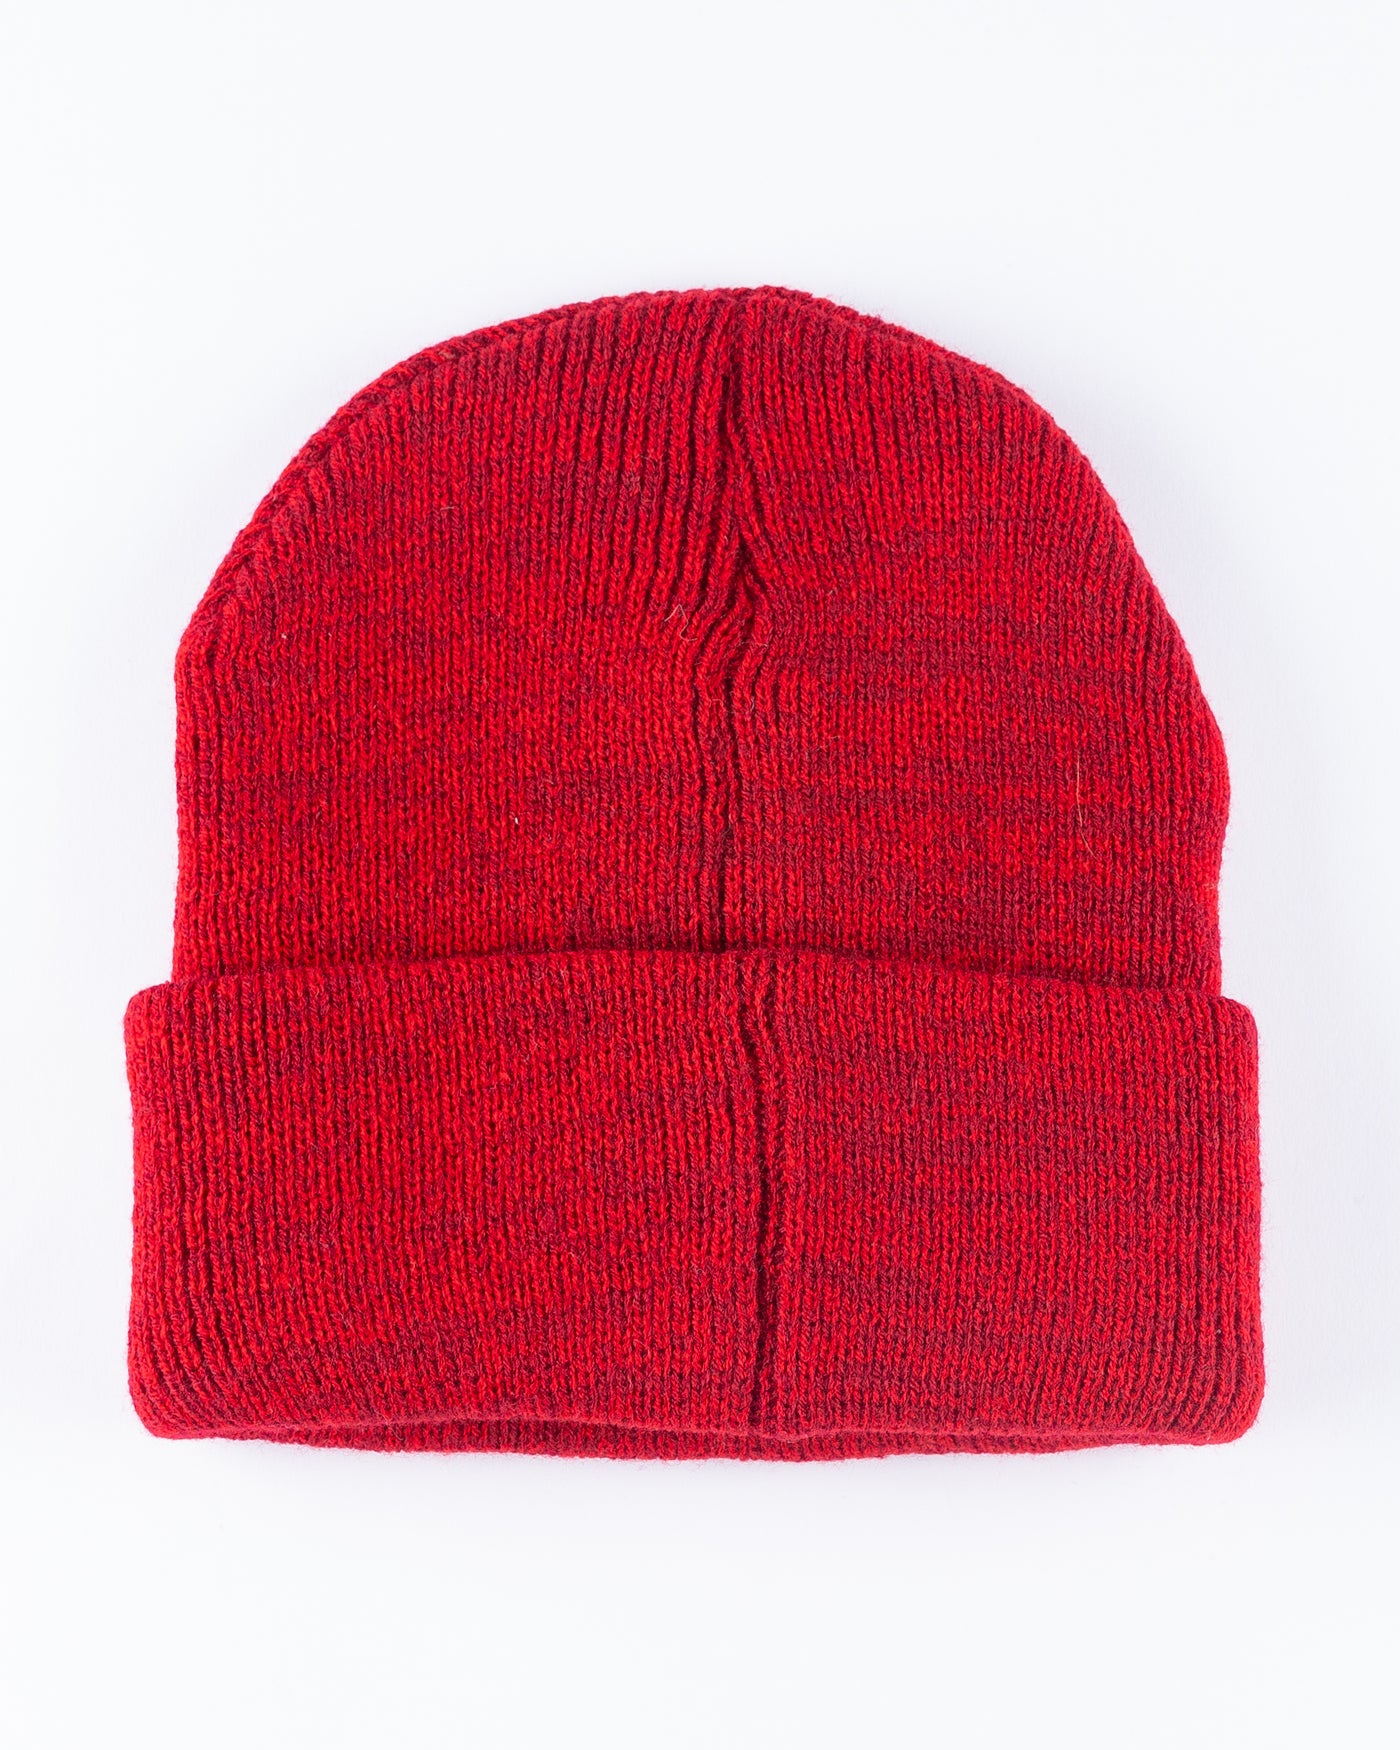 red '47 brand knit beanie with Chicago Blackhawks primary logo embroidered on front - back lay flat